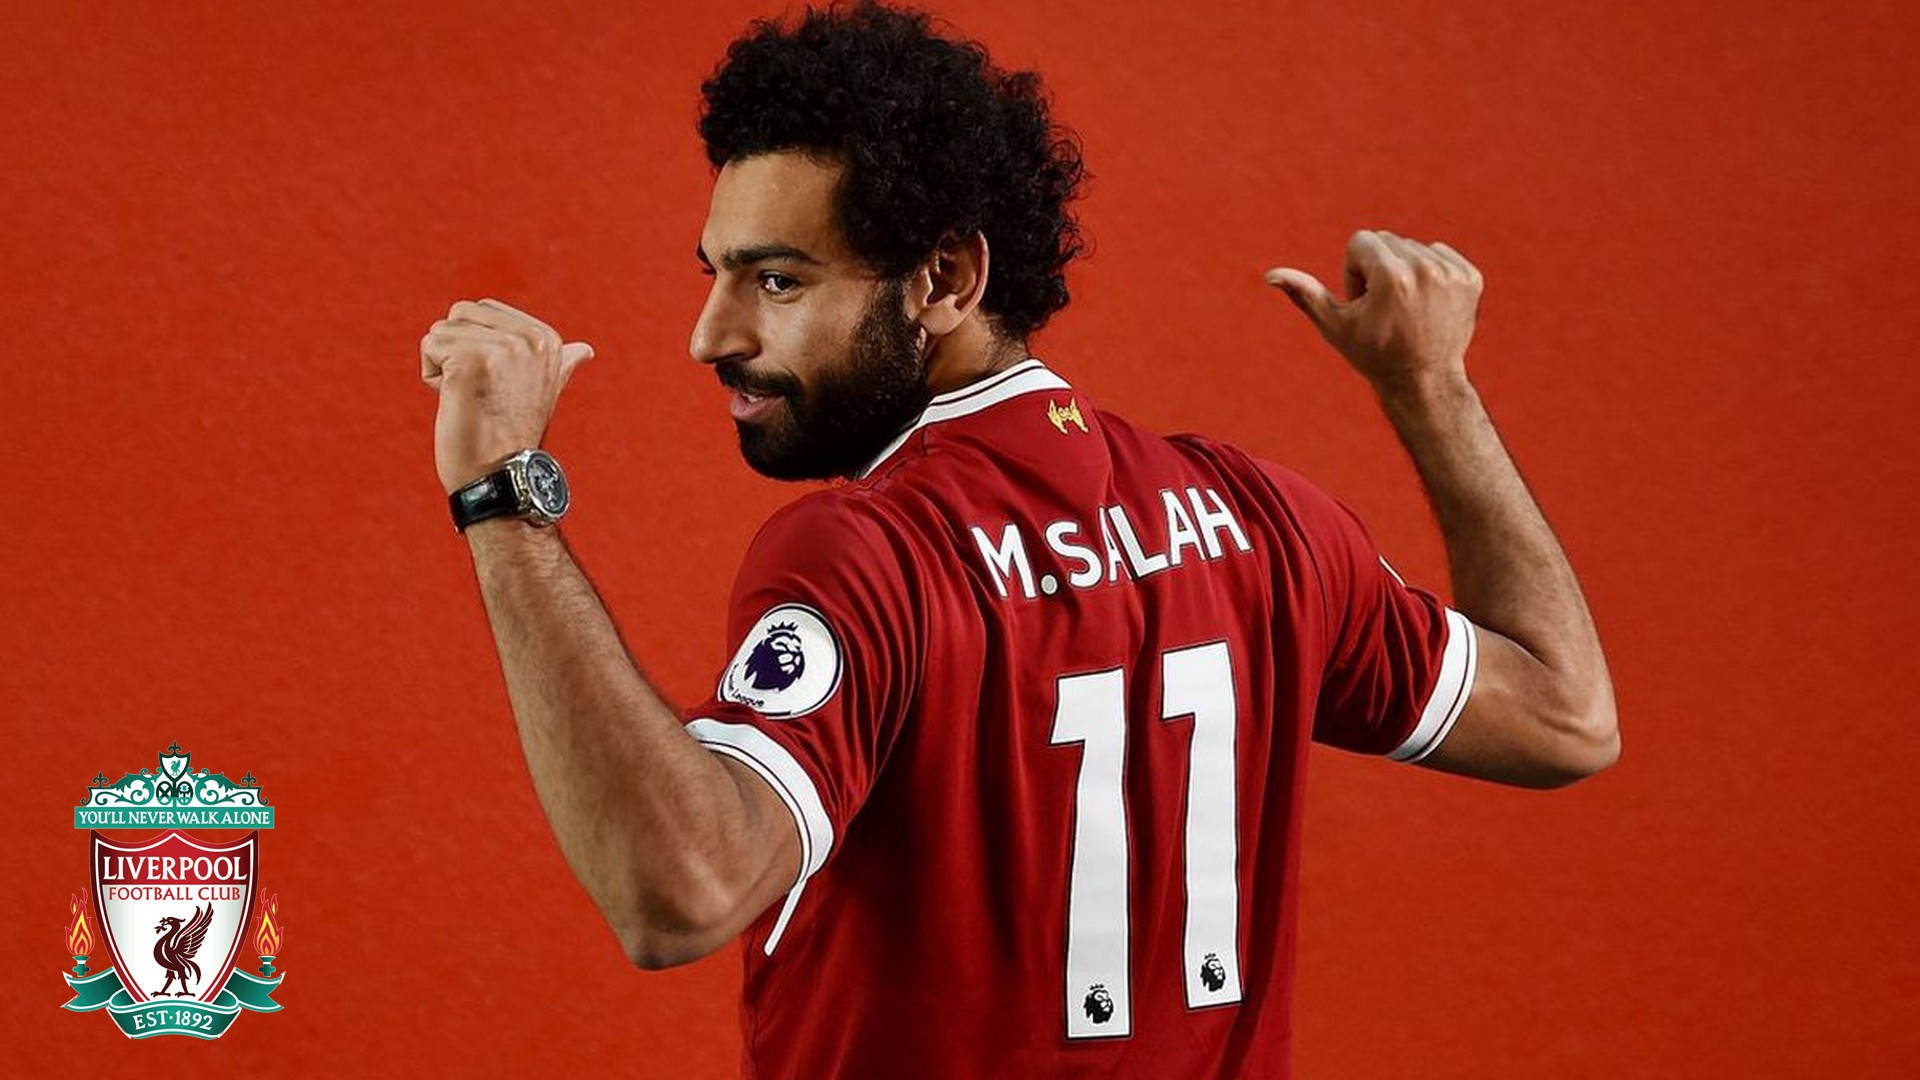 HD Mohamed Salah Liverpool Backgrounds with image resolution 1920x1080 pixel. You can use this wallpaper as background for your desktop Computer Screensavers, Android or iPhone smartphones